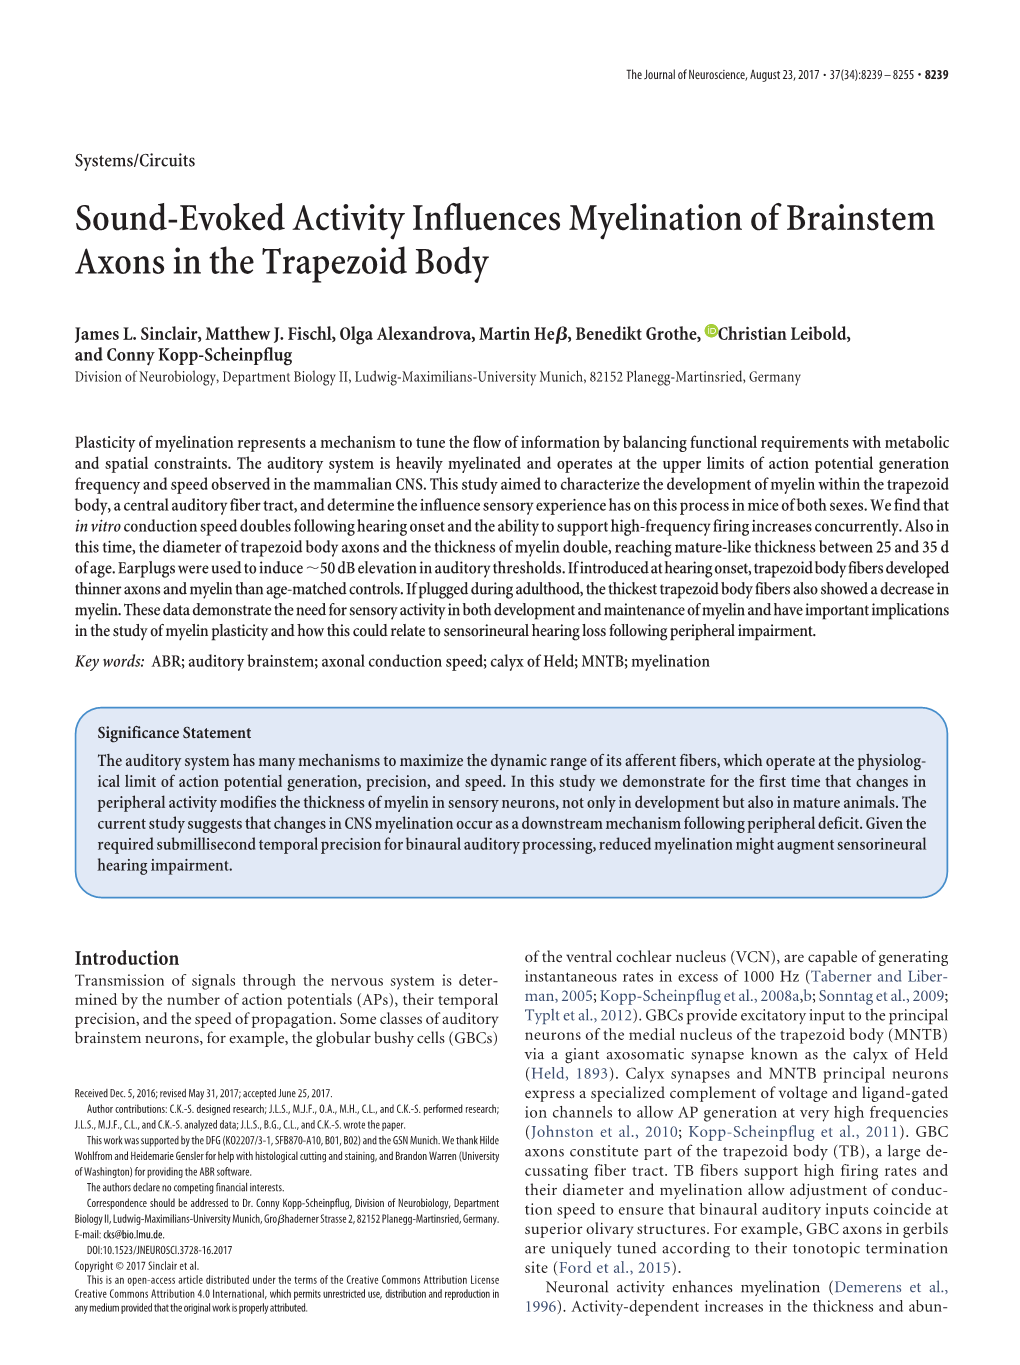 Sound-Evoked Activity Influences Myelination of Brainstem Axons in the Trapezoid Body